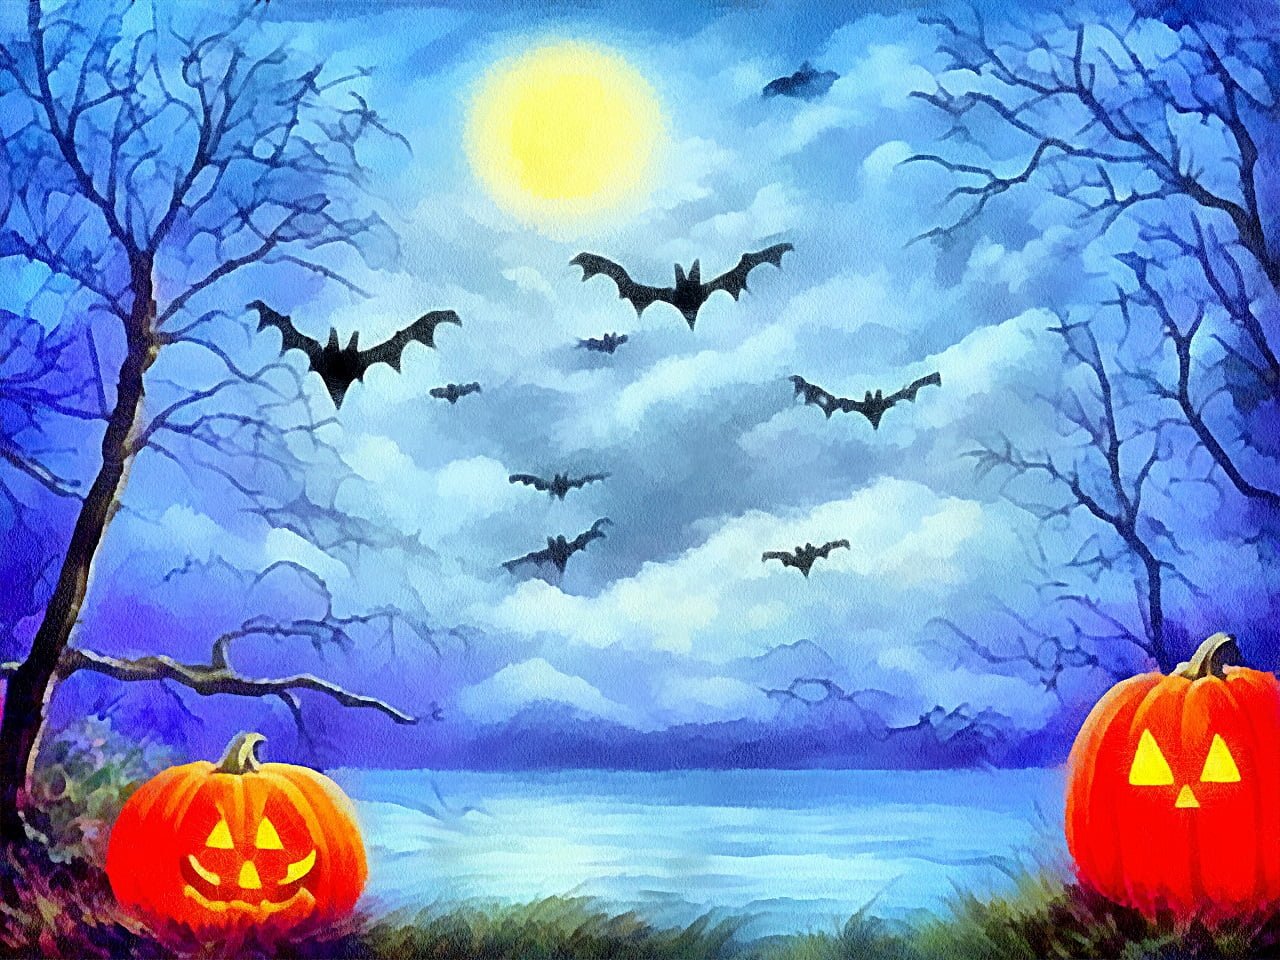 Drawing of haloween nature background with orange pumpkin in painting on paper style. 45 Easy Halloween Drawing Ideas.